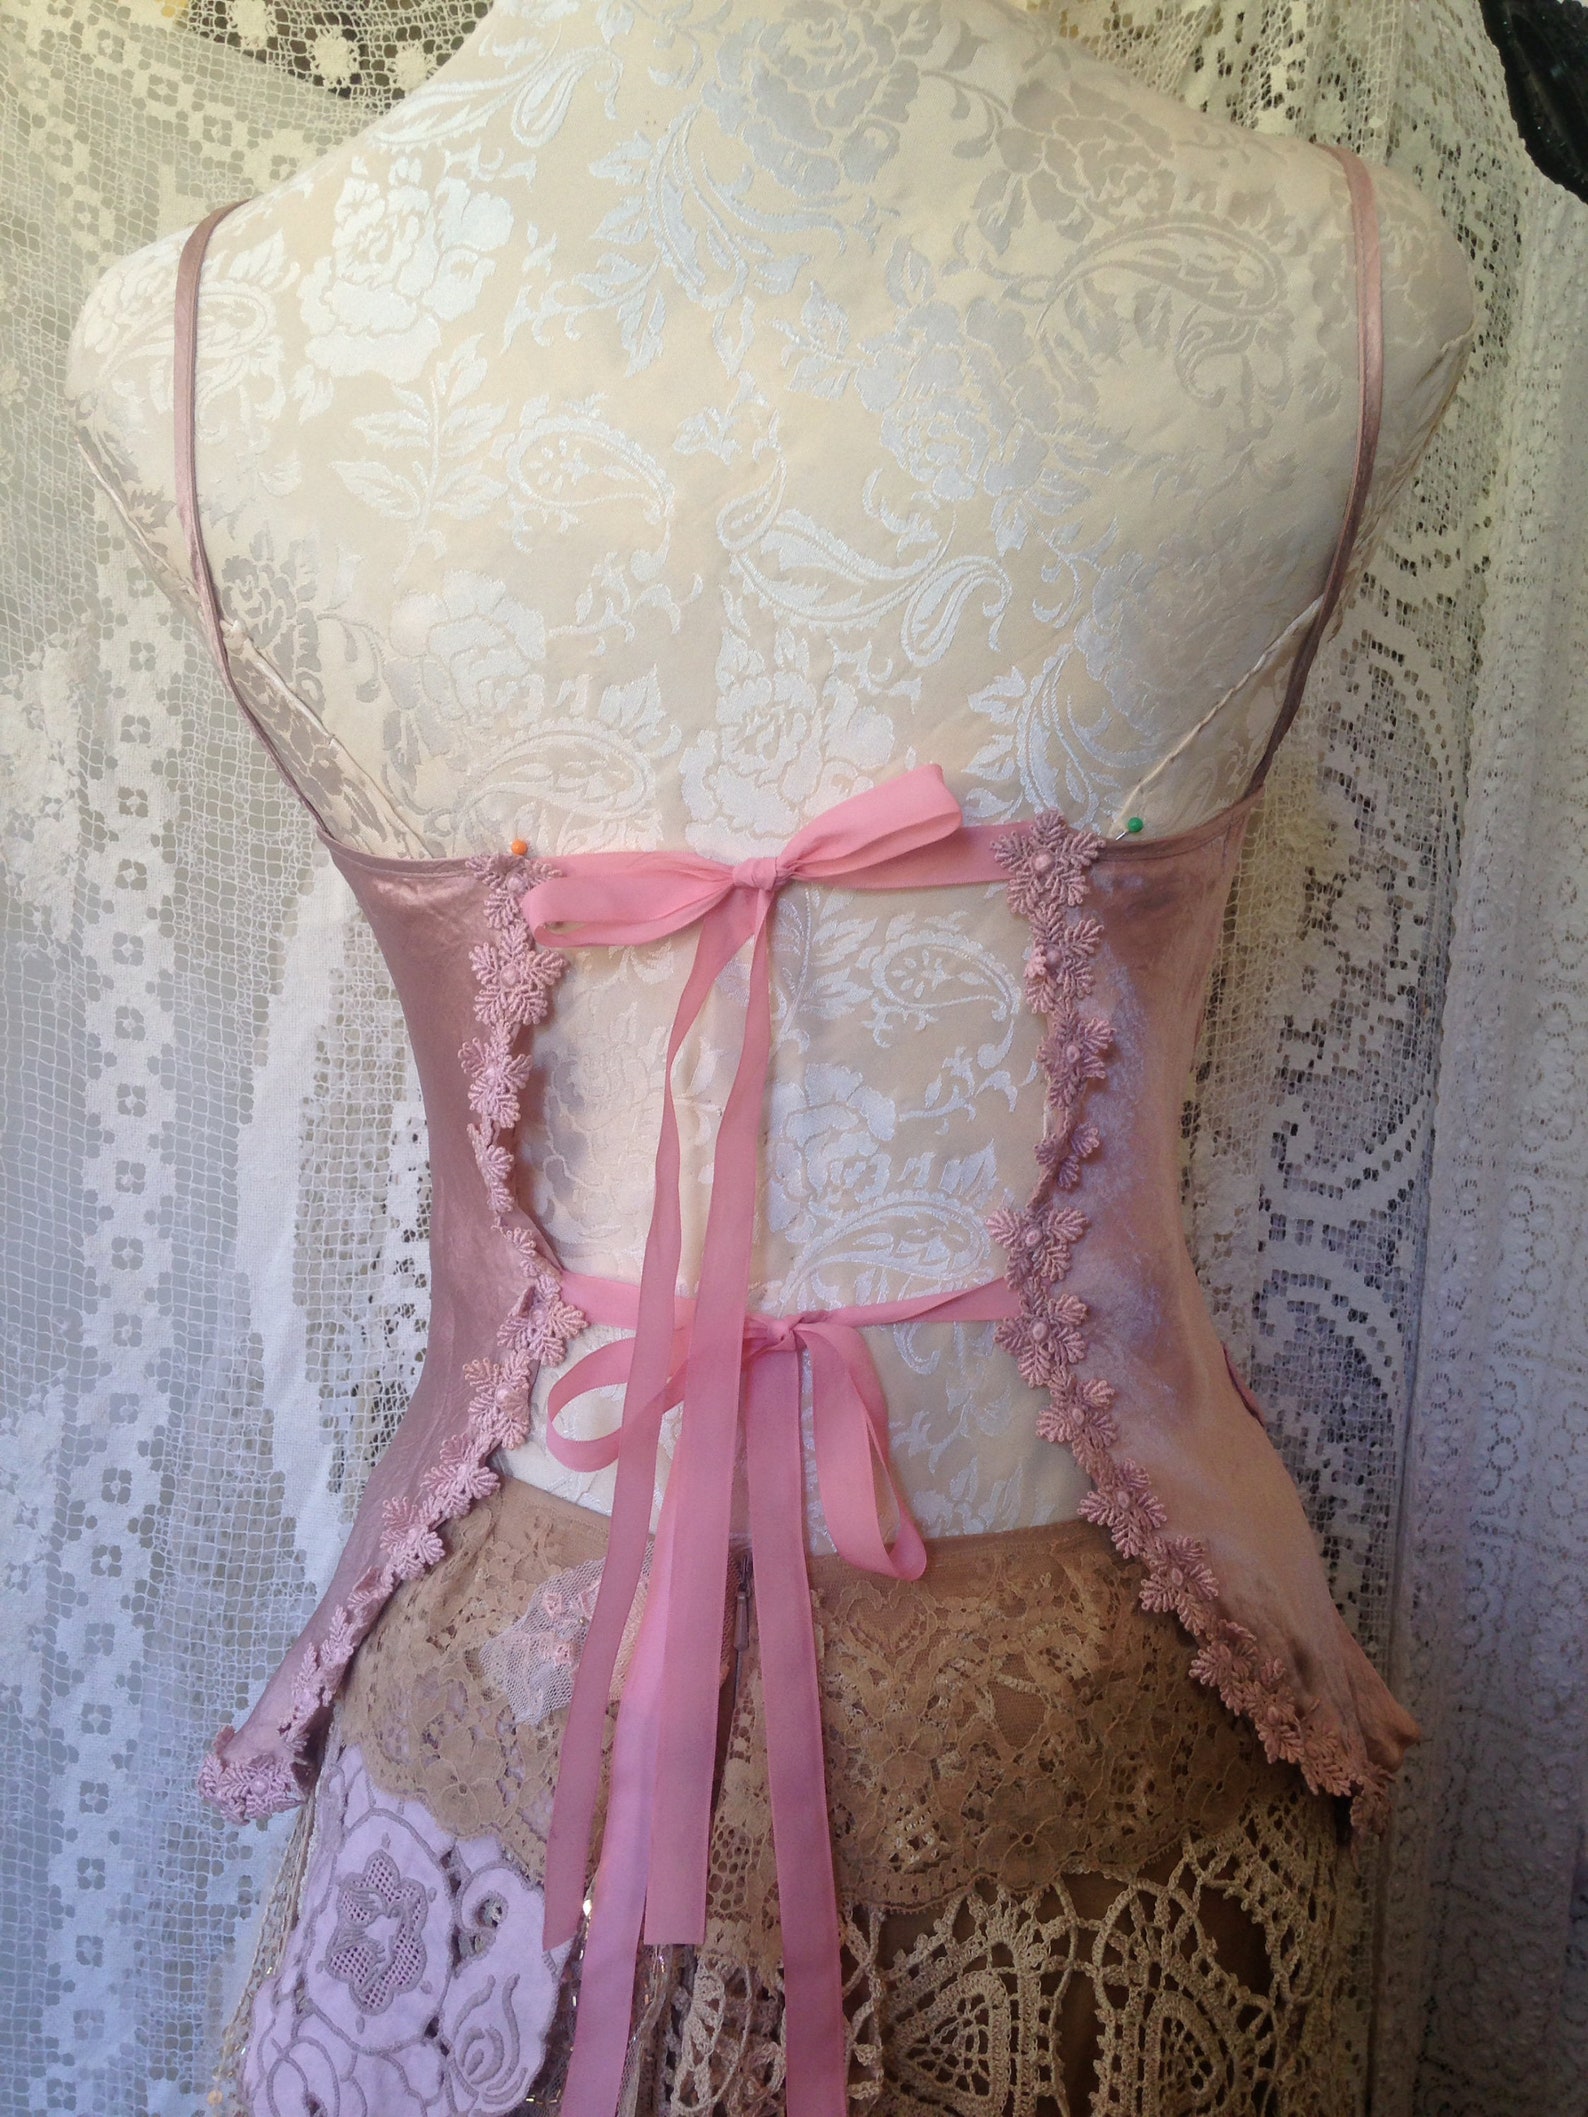 ballet pink tie-back shoestring top.fairy lagenlook shabby romantic delicate with silk flower details and lots of guipure lace t